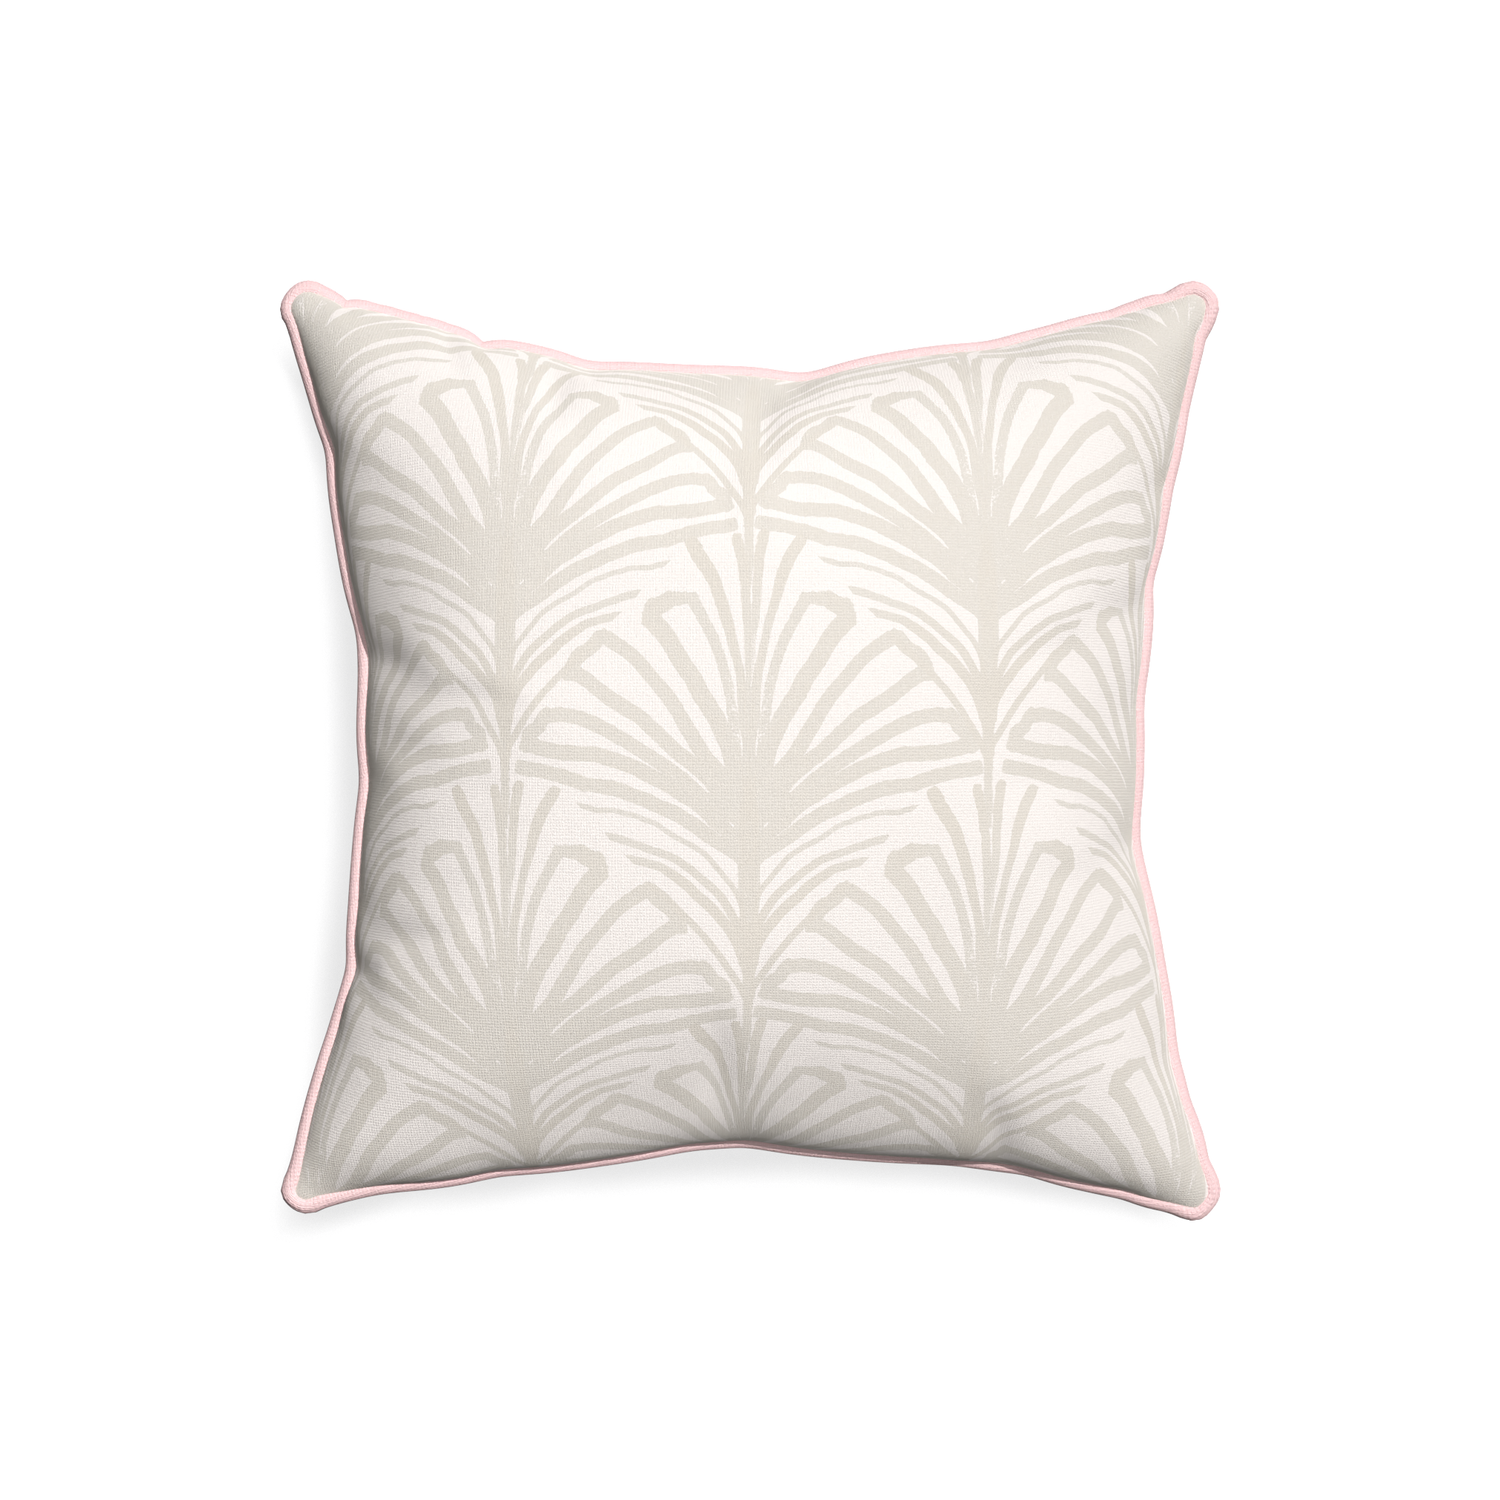 20-square suzy sand custom pillow with petal piping on white background